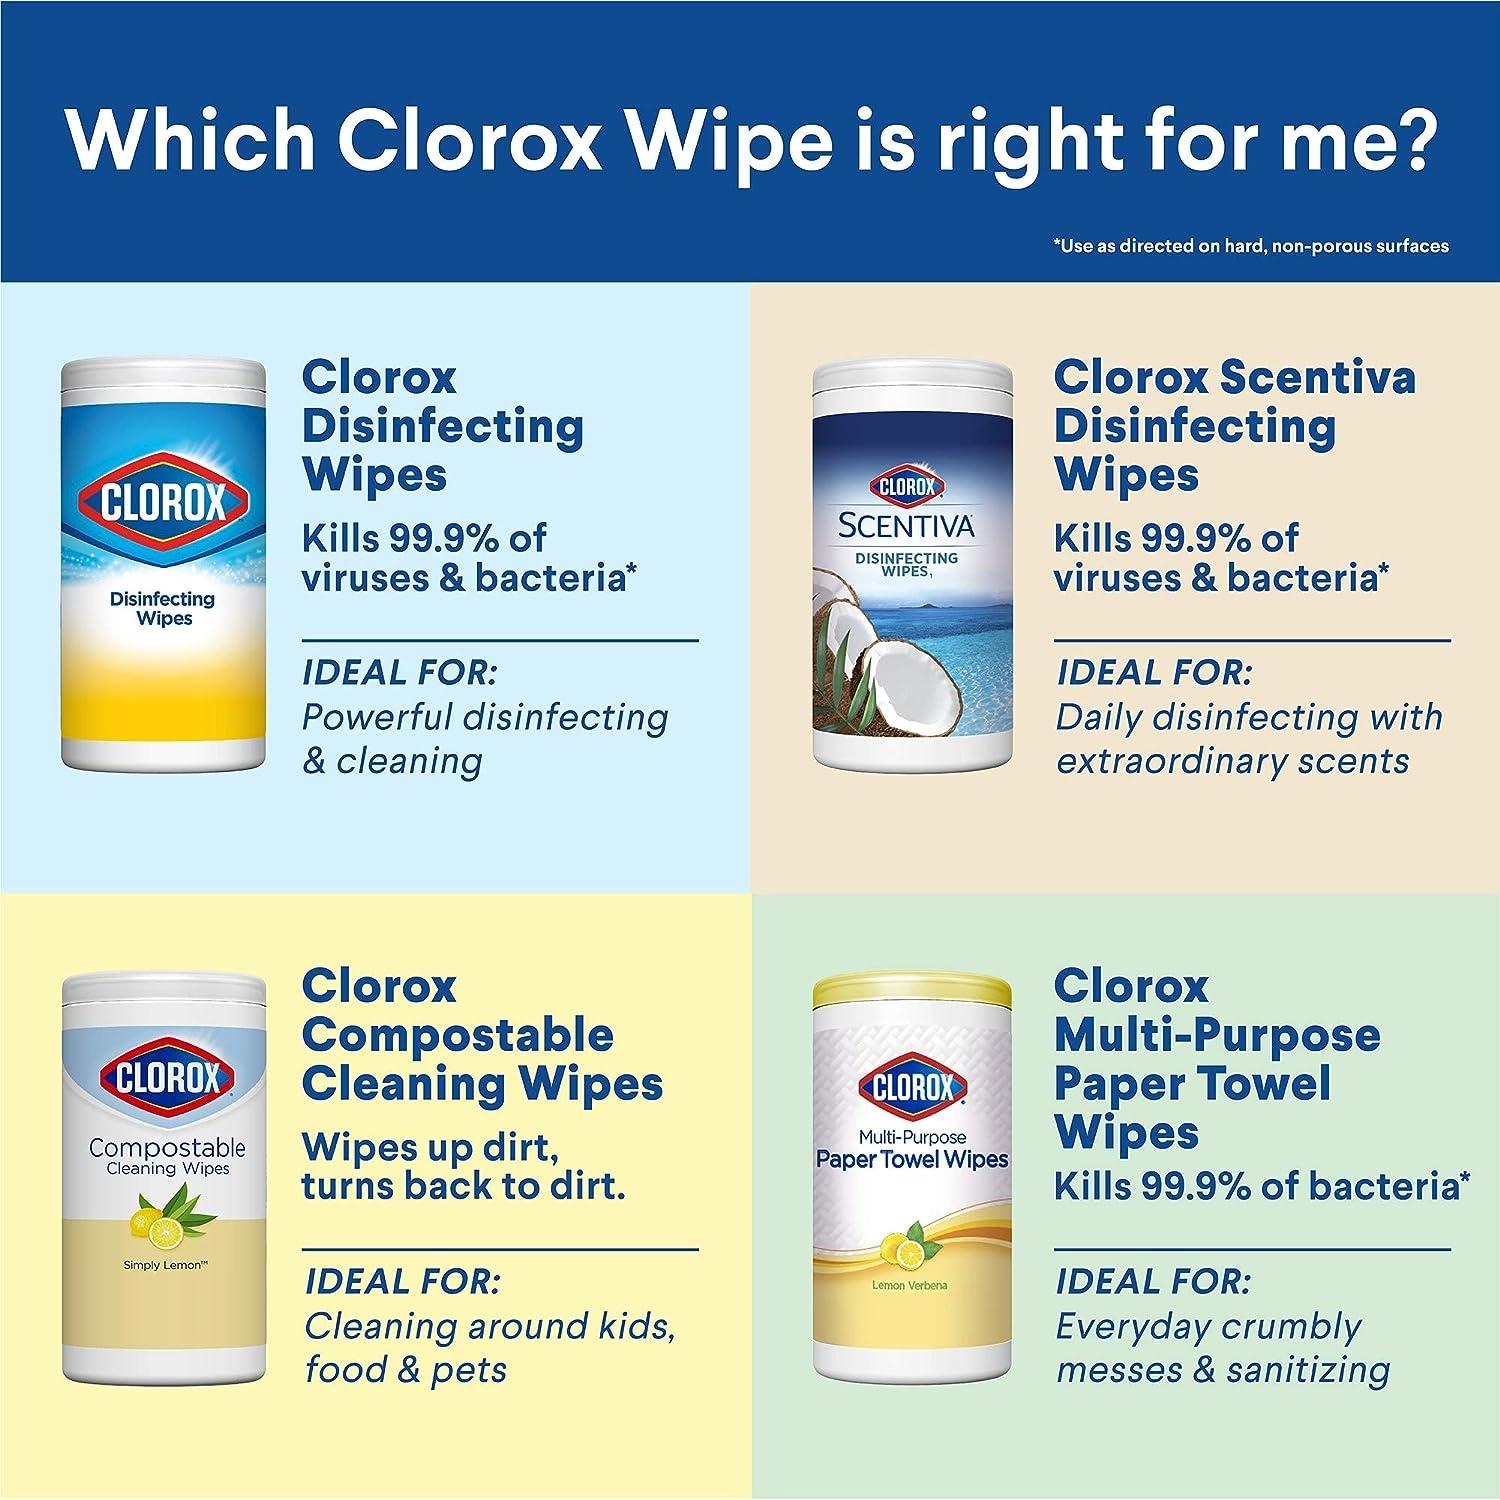 Clorox Free & Clear Compostable Cleaning Wipes, All Purpose Wipes